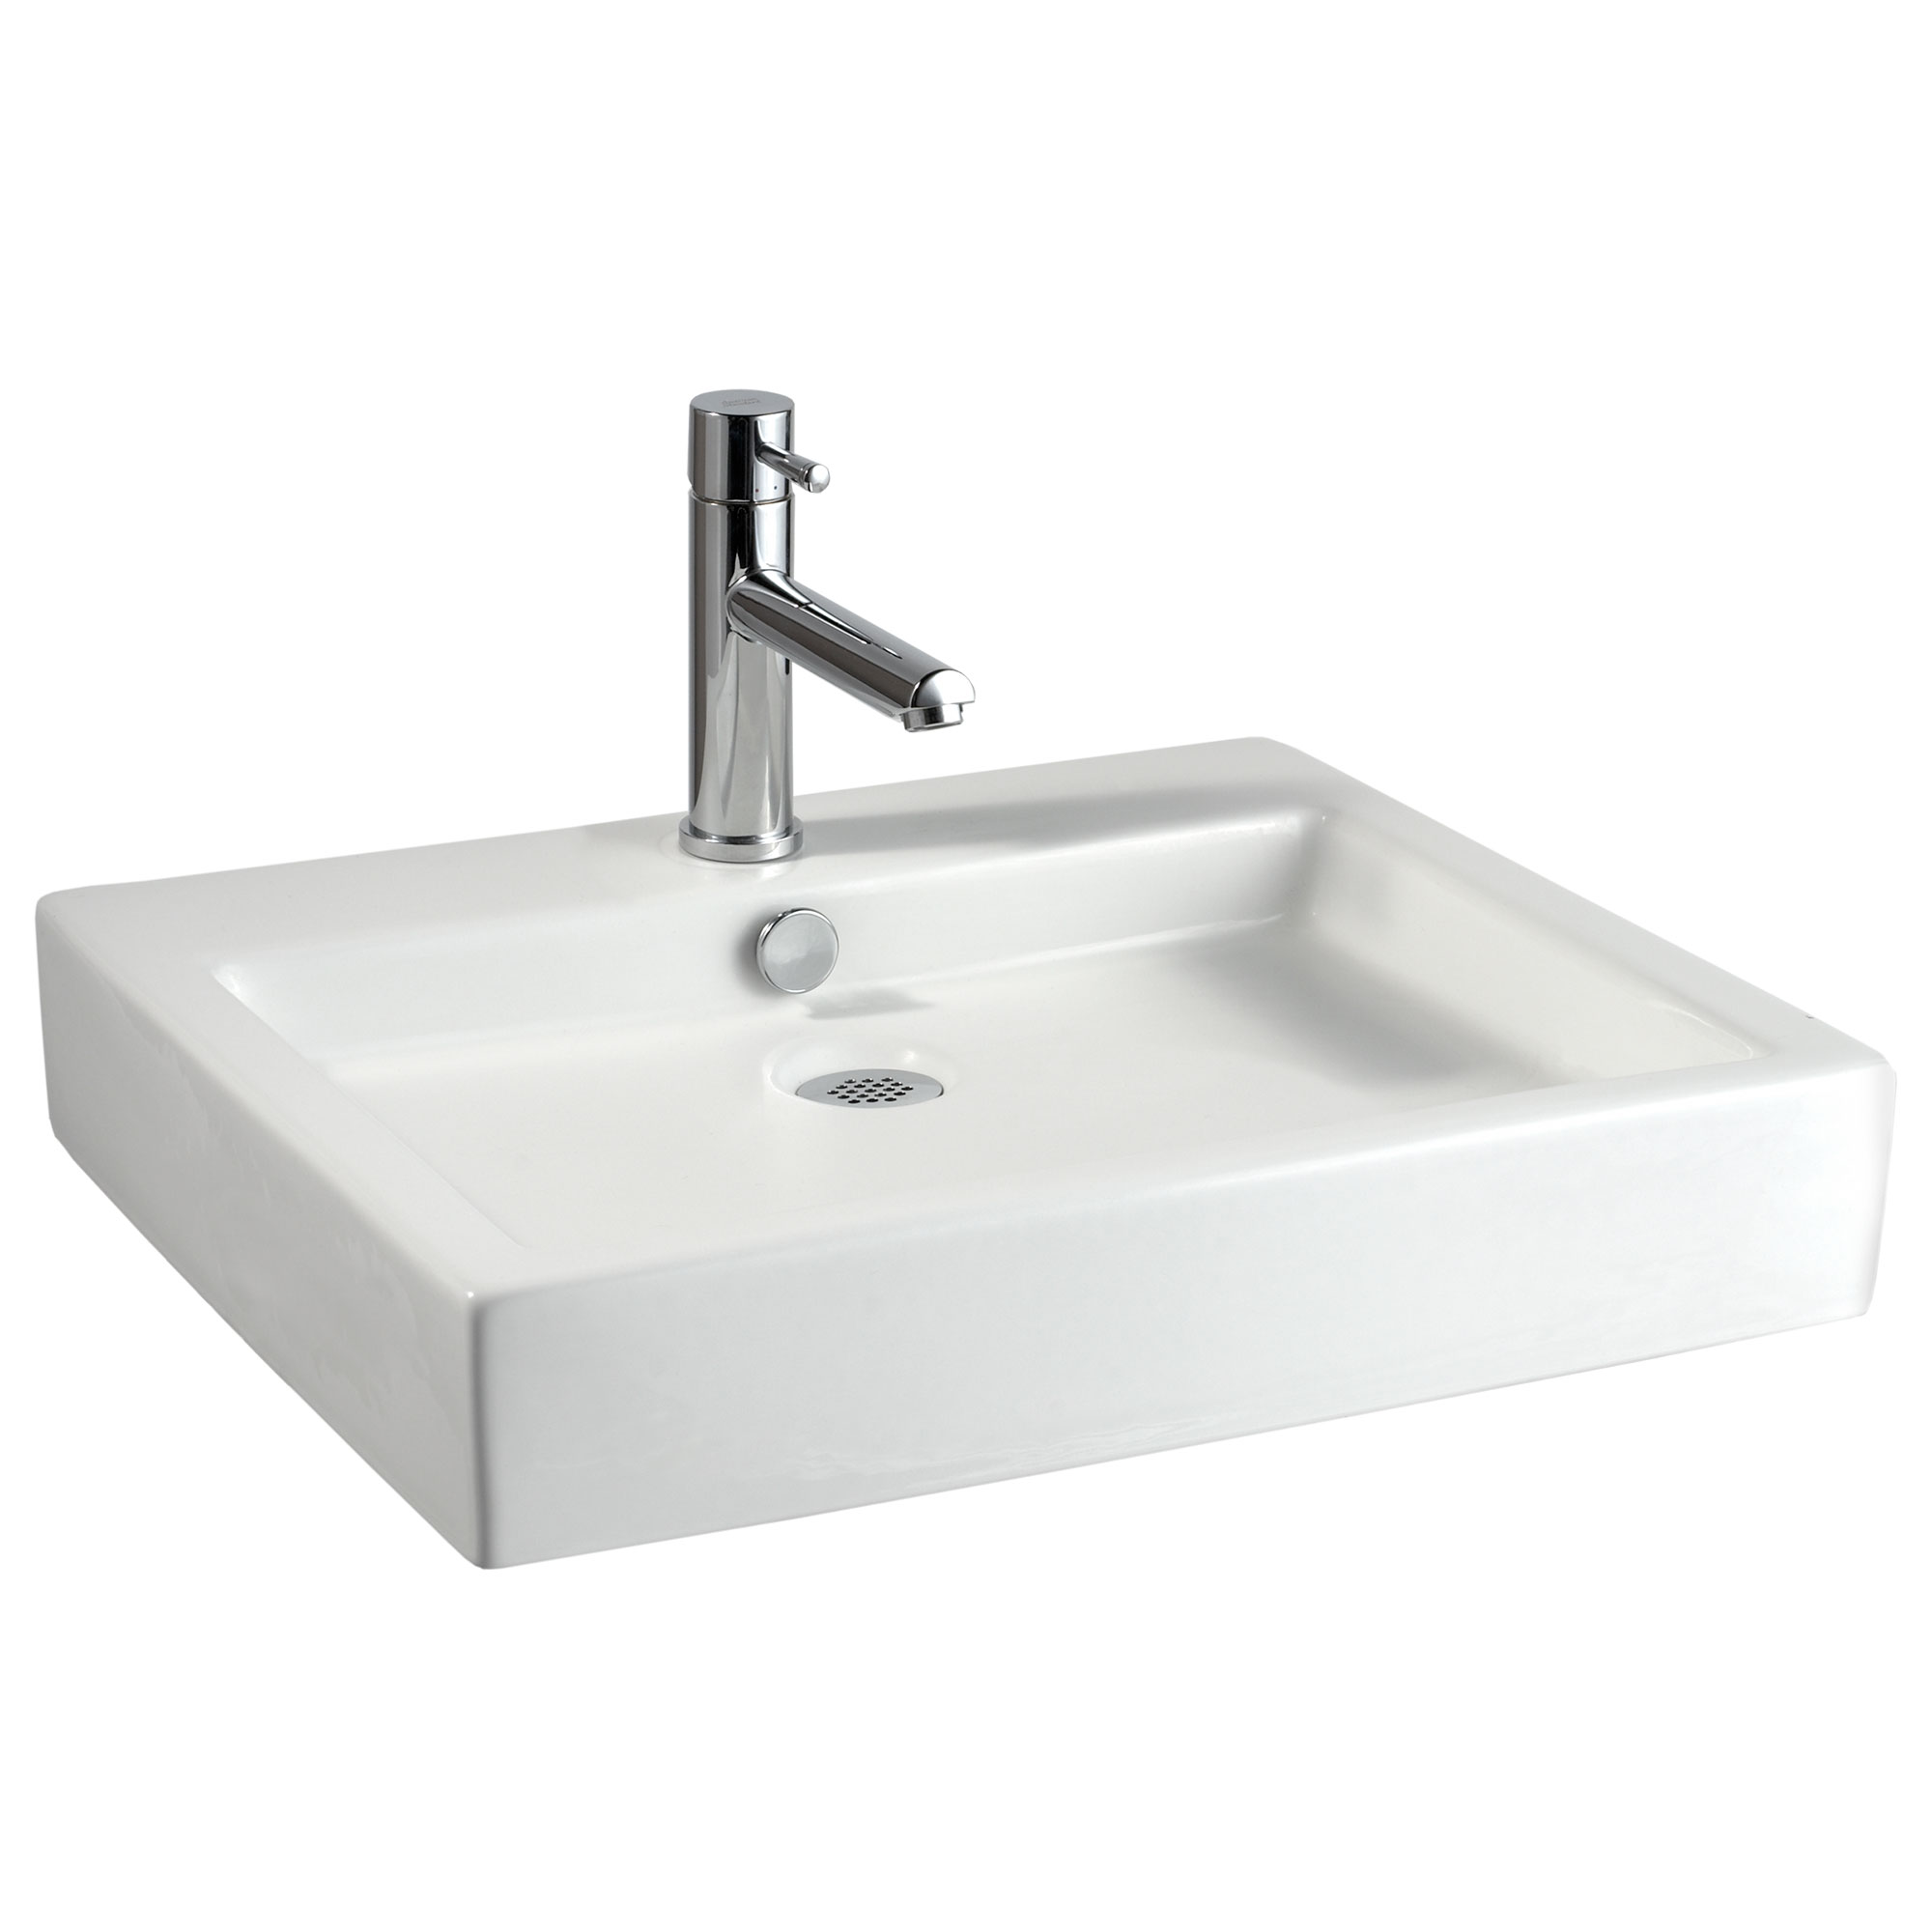 Studio® 22 x 18-1/2-Inch Above Counter Sink With Center Hole Only